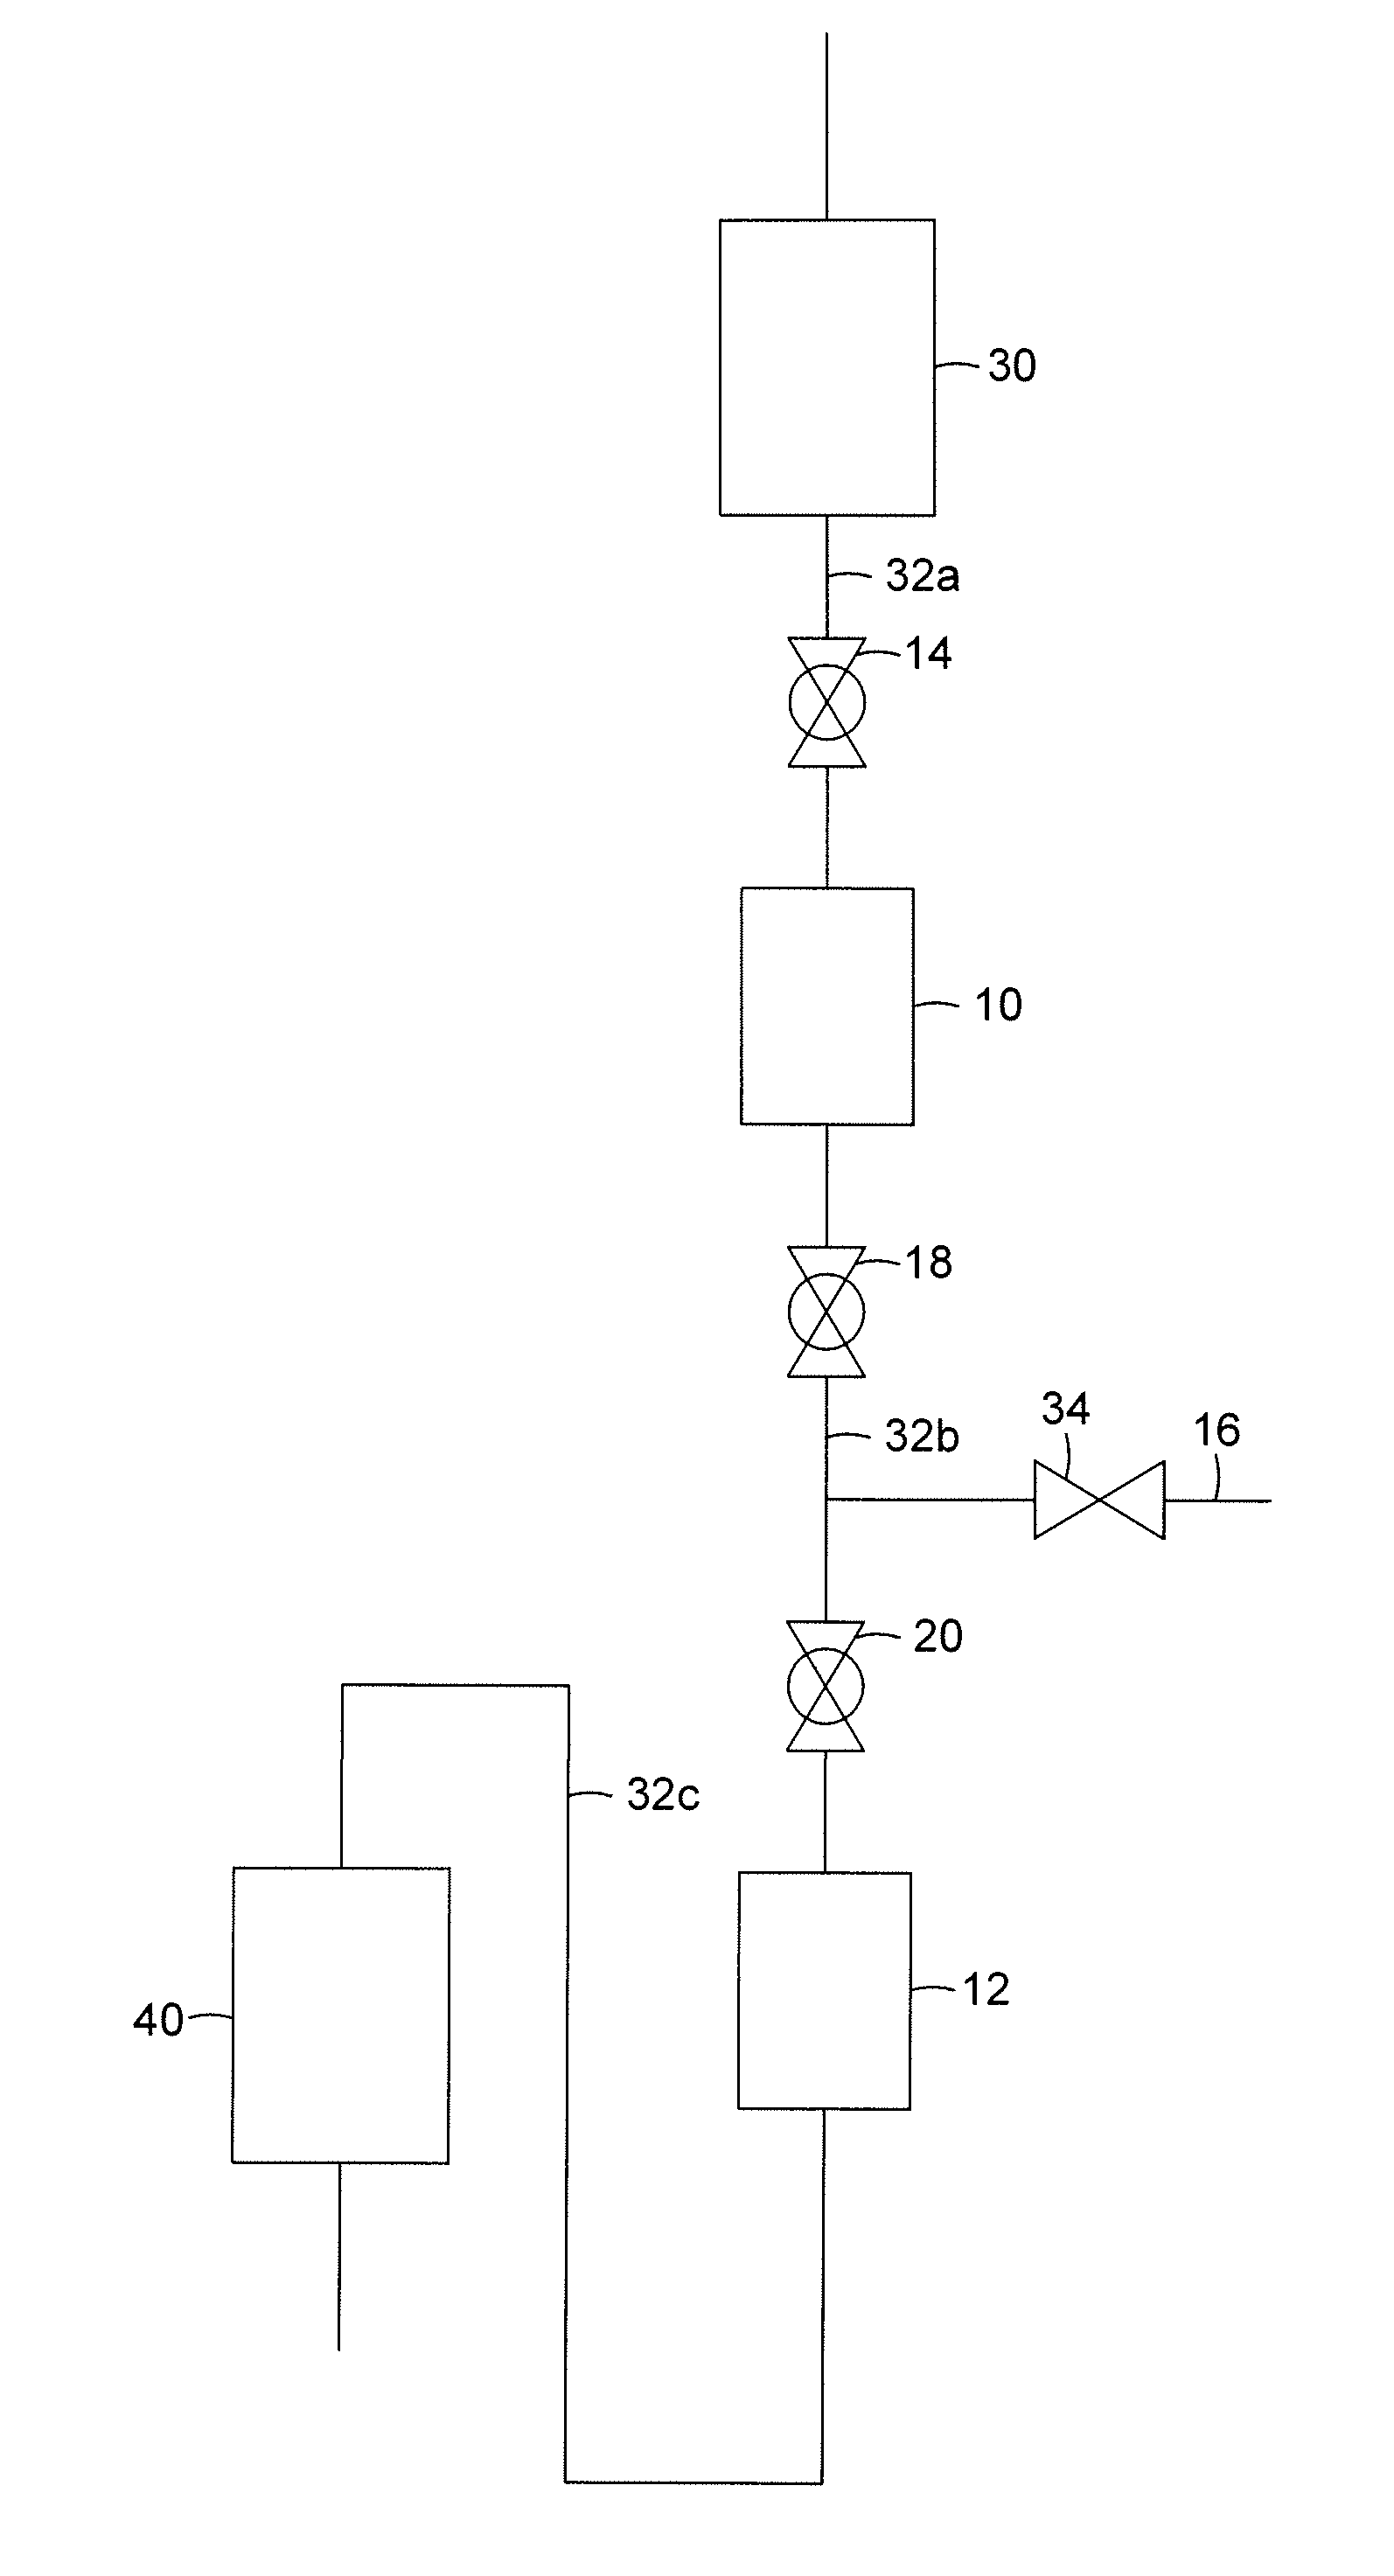 Device to Transfer Catalyst from a Low Pressure Vessel to a High Pressure Vessel and purge the Transferred Catalyst